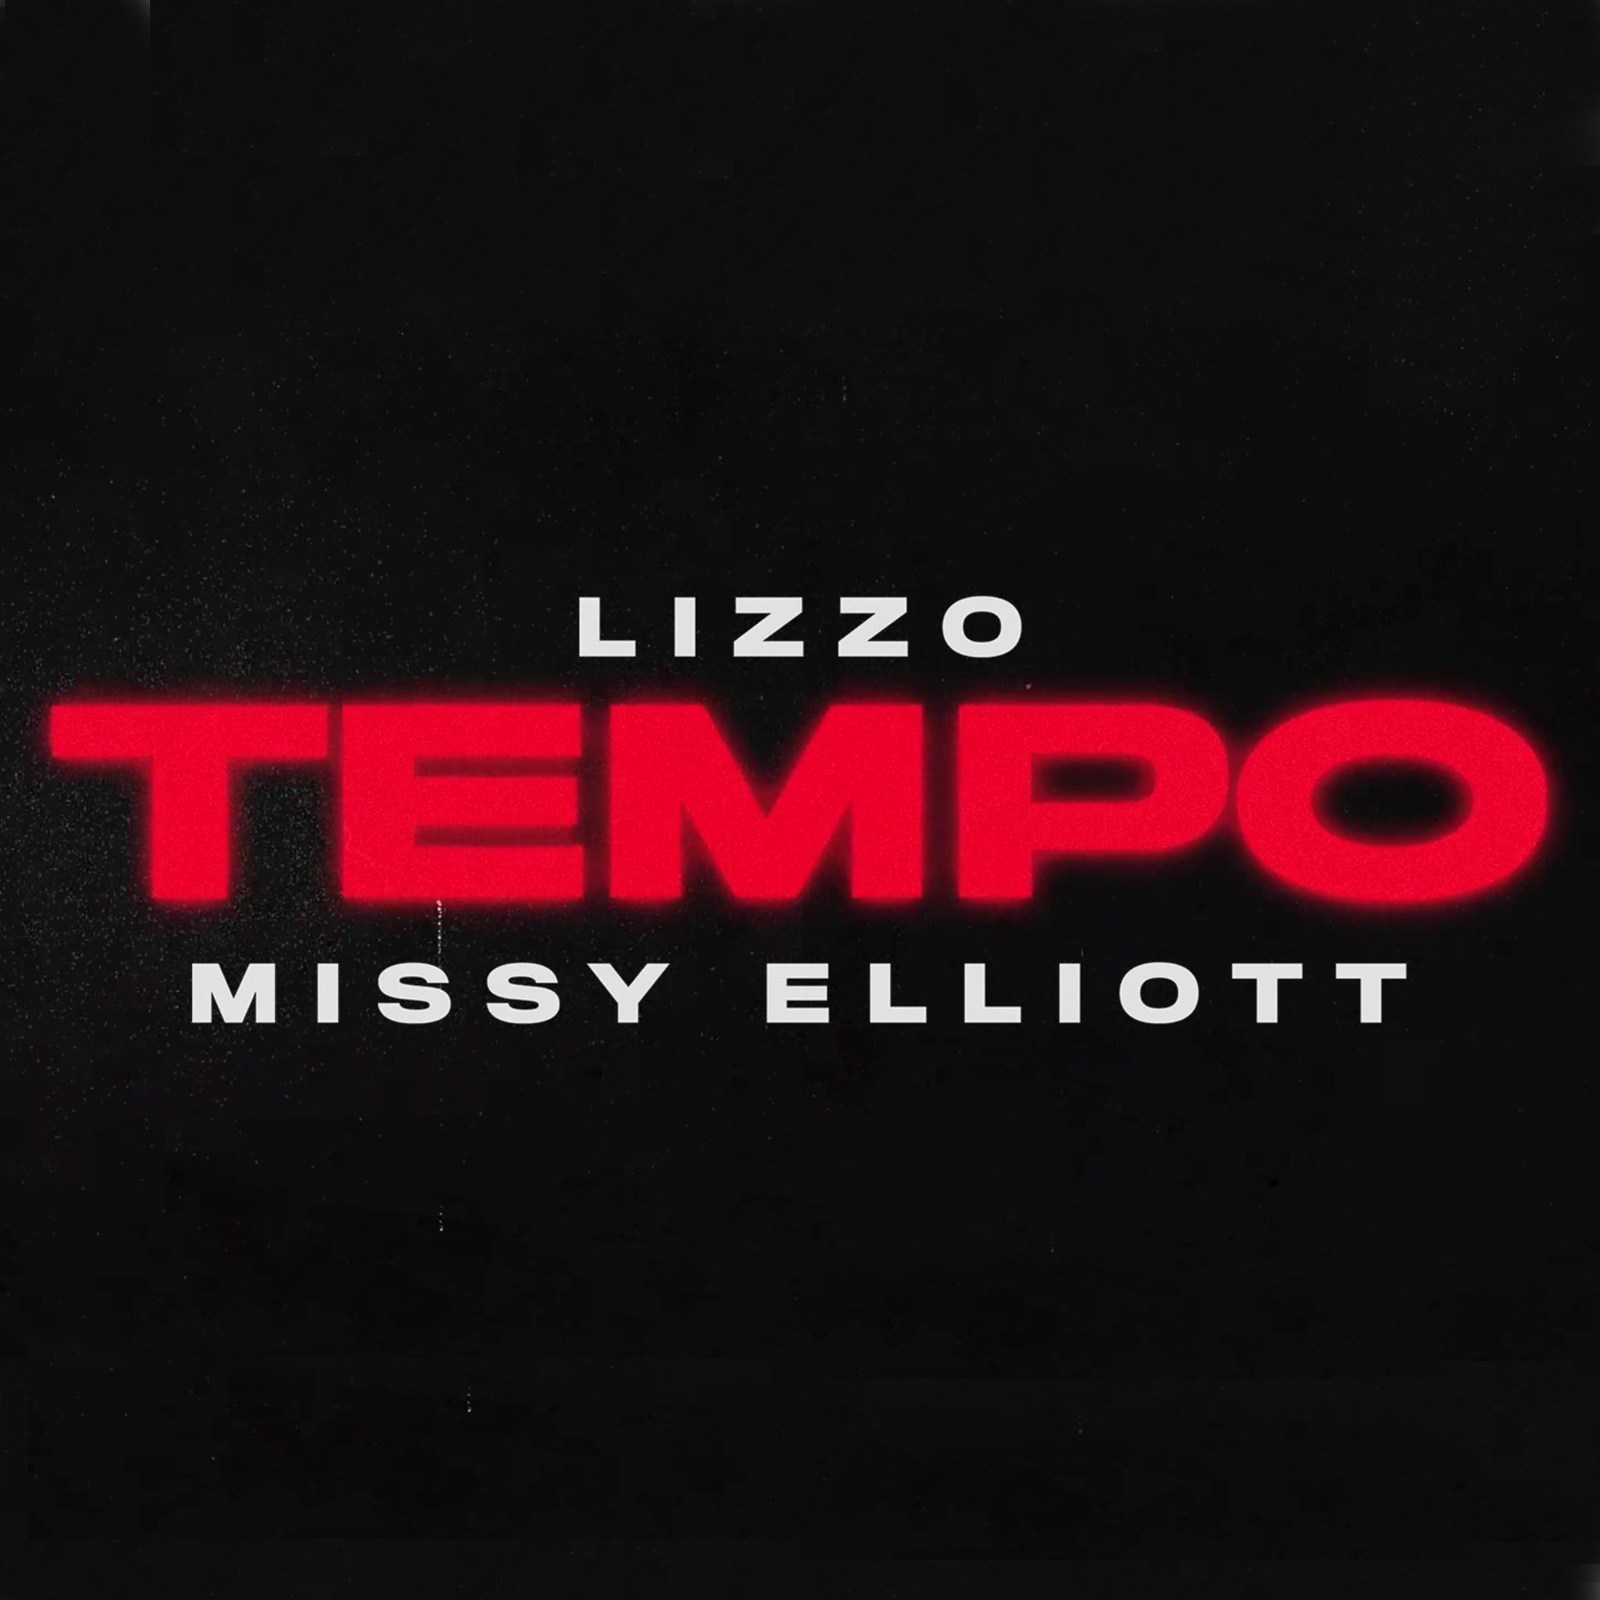 Tempo Lizzo Song Wikipedia - what is the roblox id for truth hurts